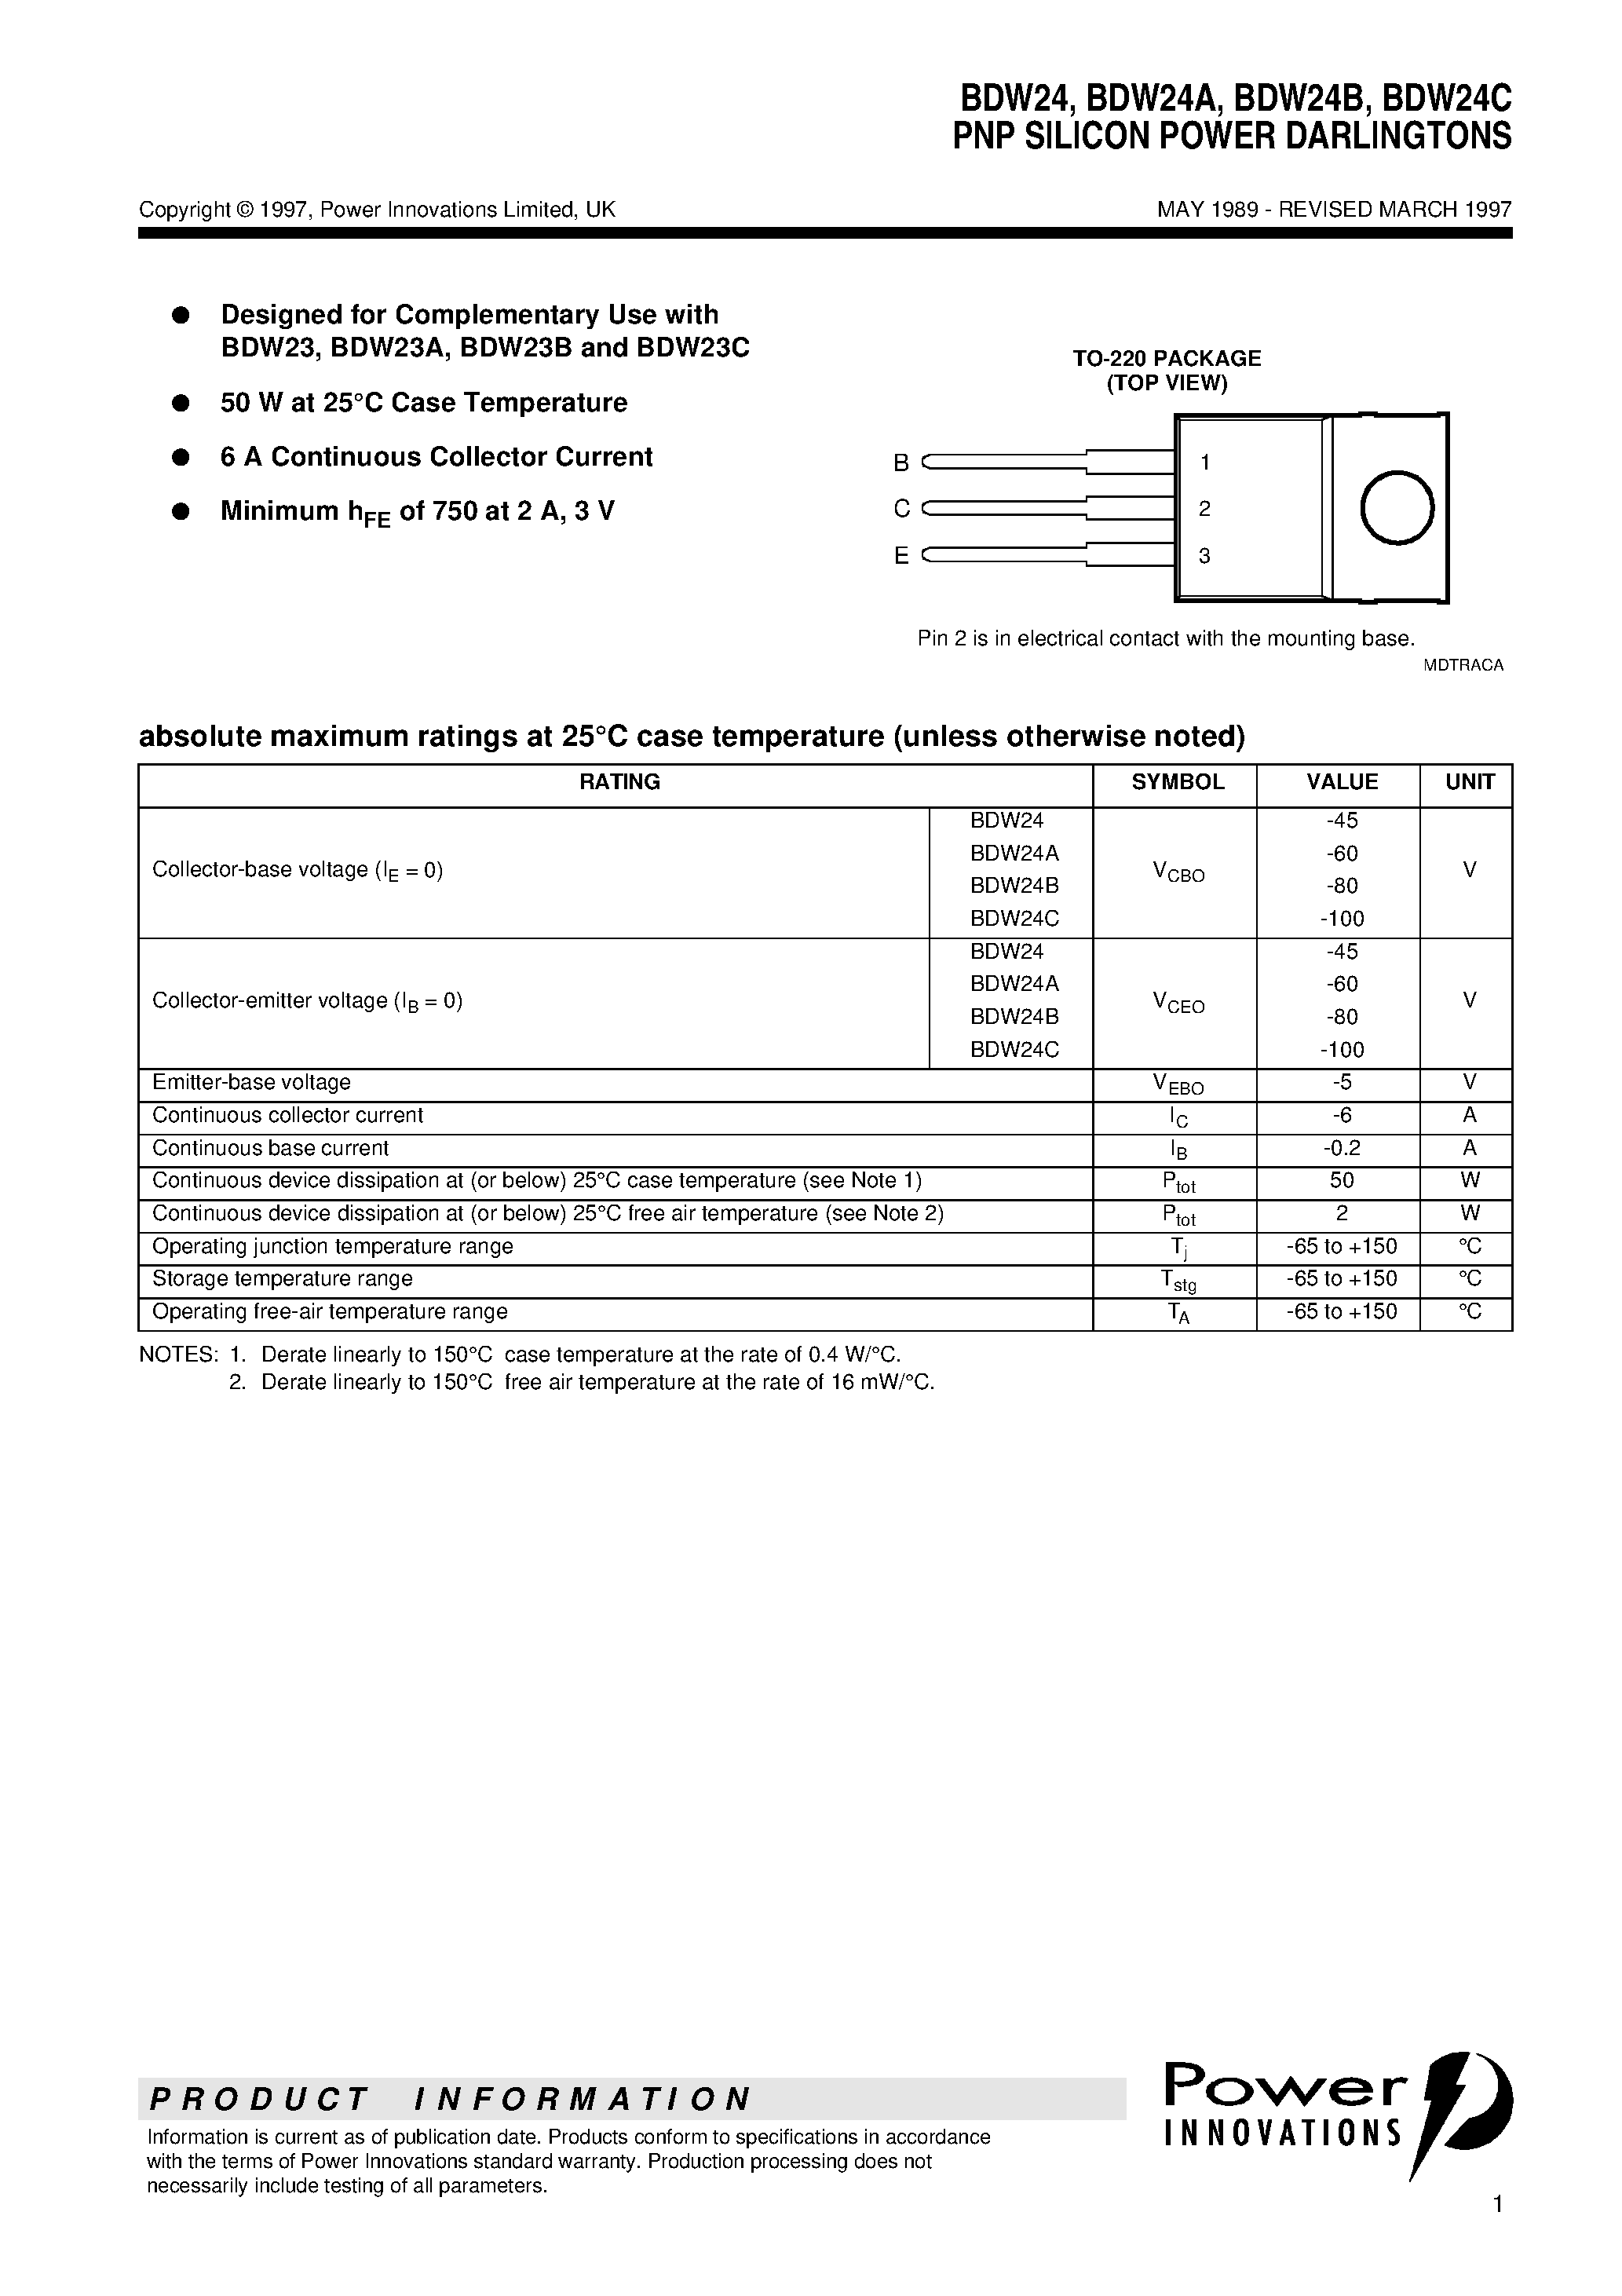 Datasheet BDW24C - PNP SILICON POWER DARLINGTONS page 1